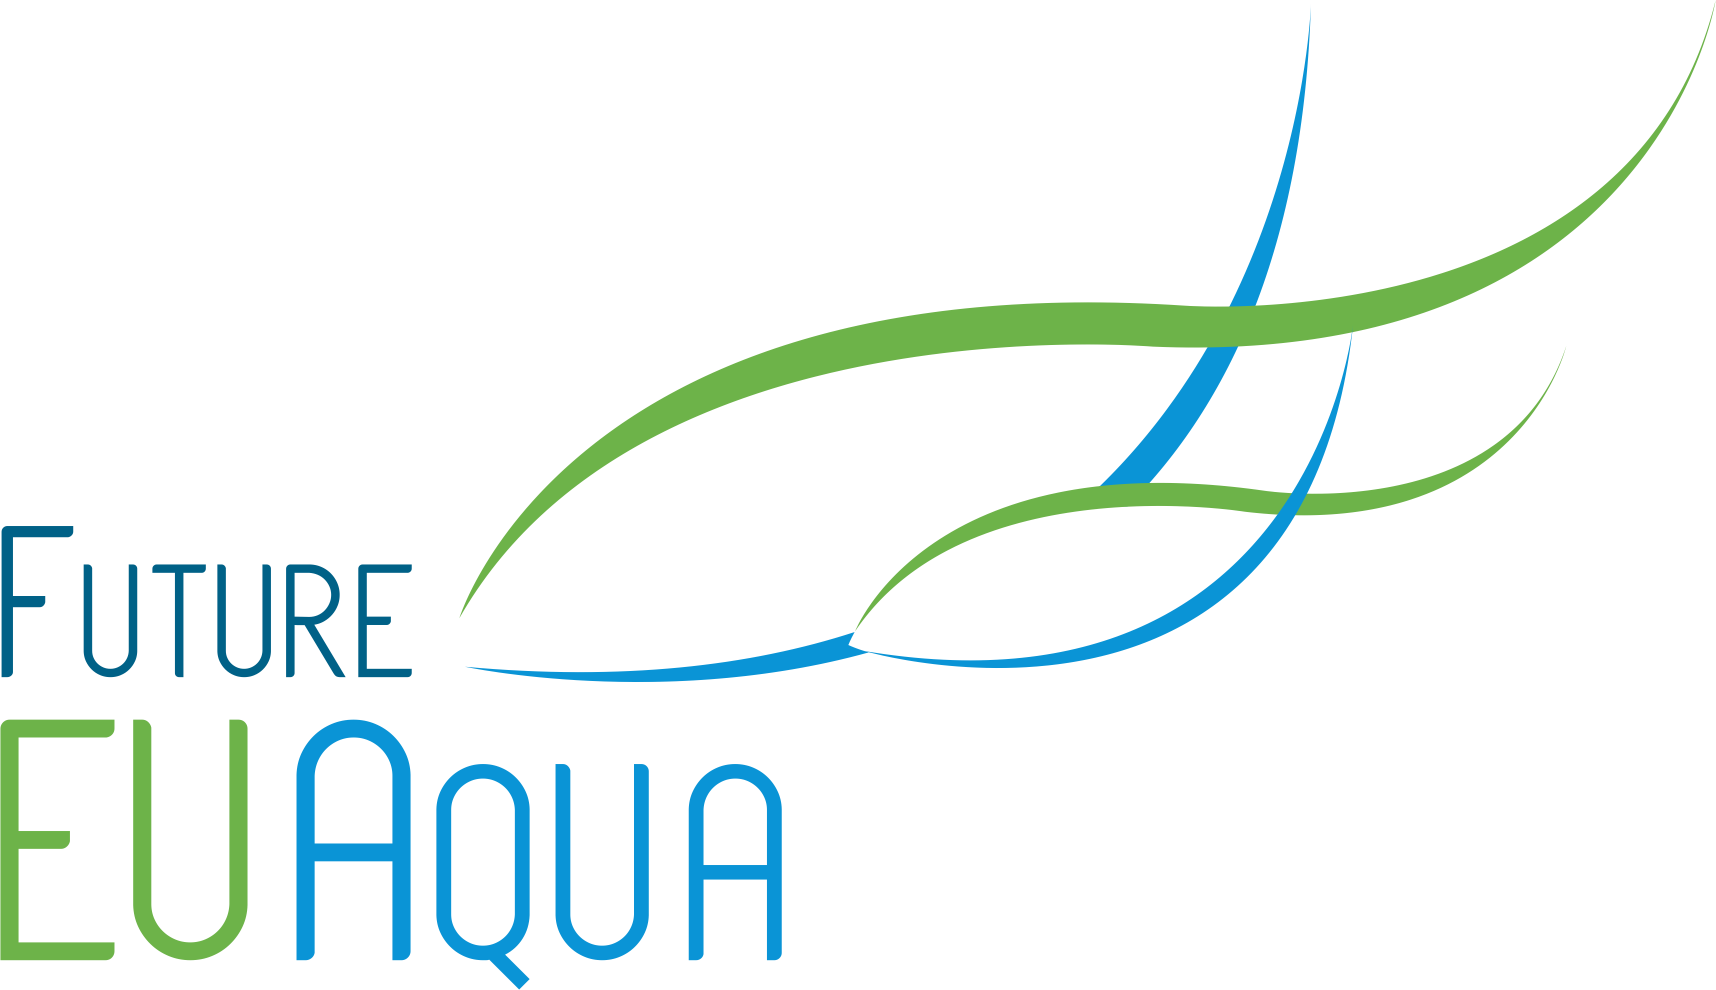 Future growth in sustainable, resilient and climate friendly organic and conventional European aquaculture: “FutureEUAqua”